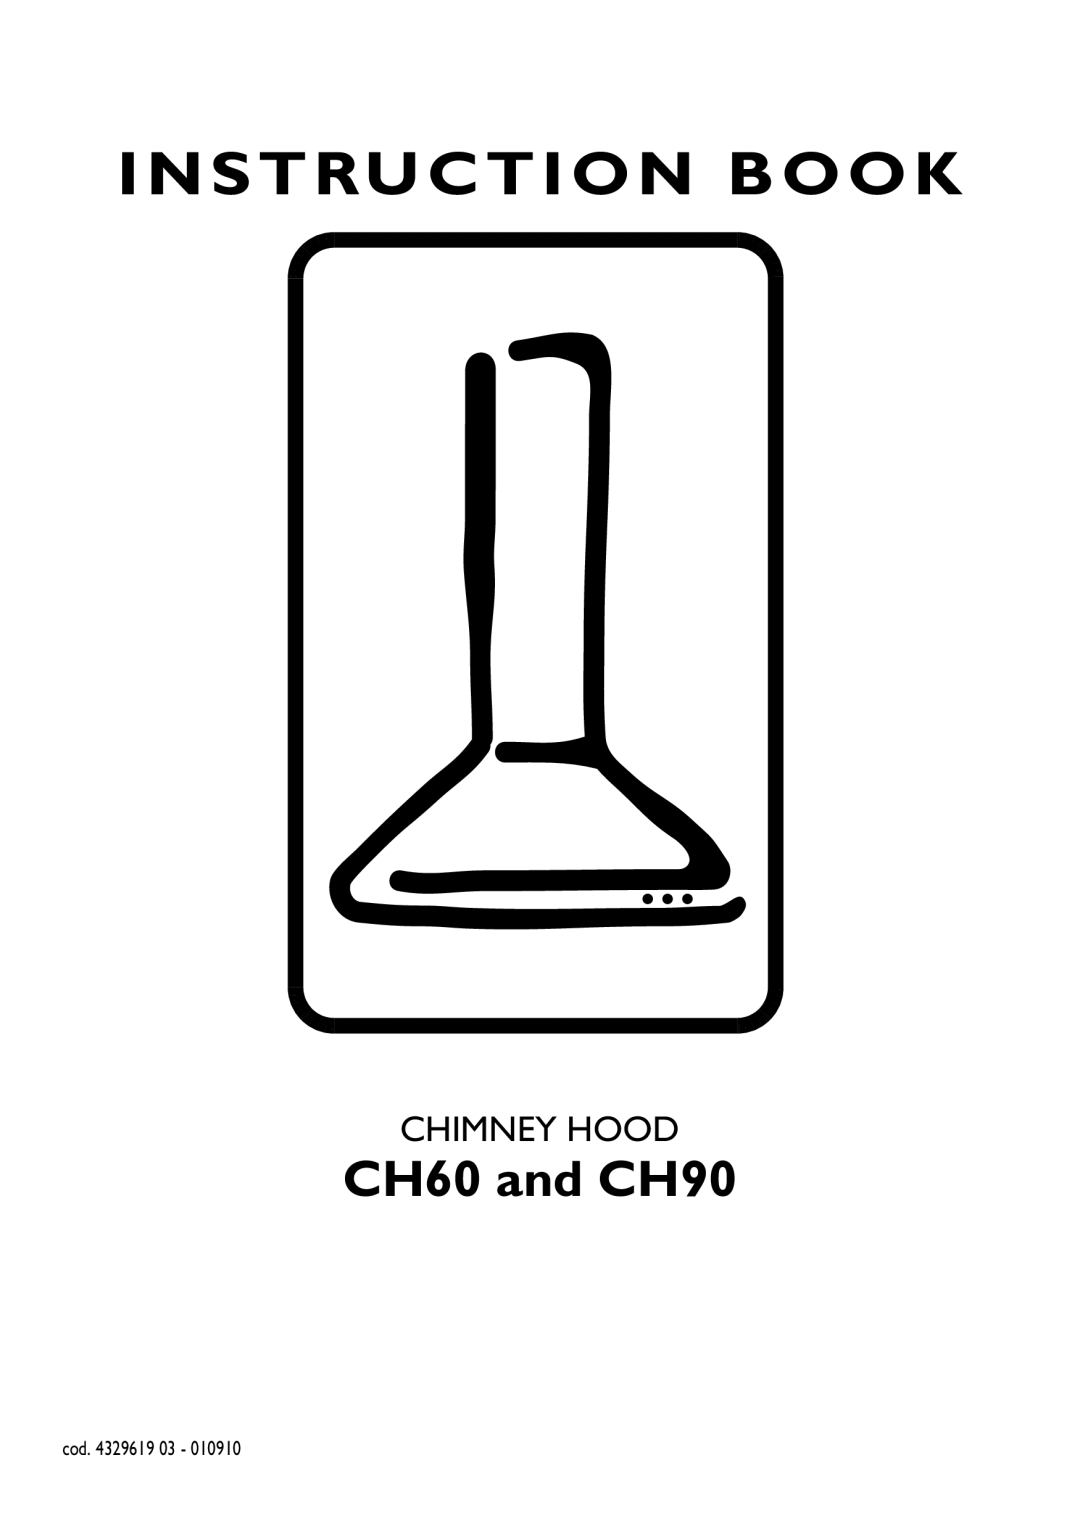 Zanussi manual Instruction Book, CH60 and CH90, Chimney Hood 